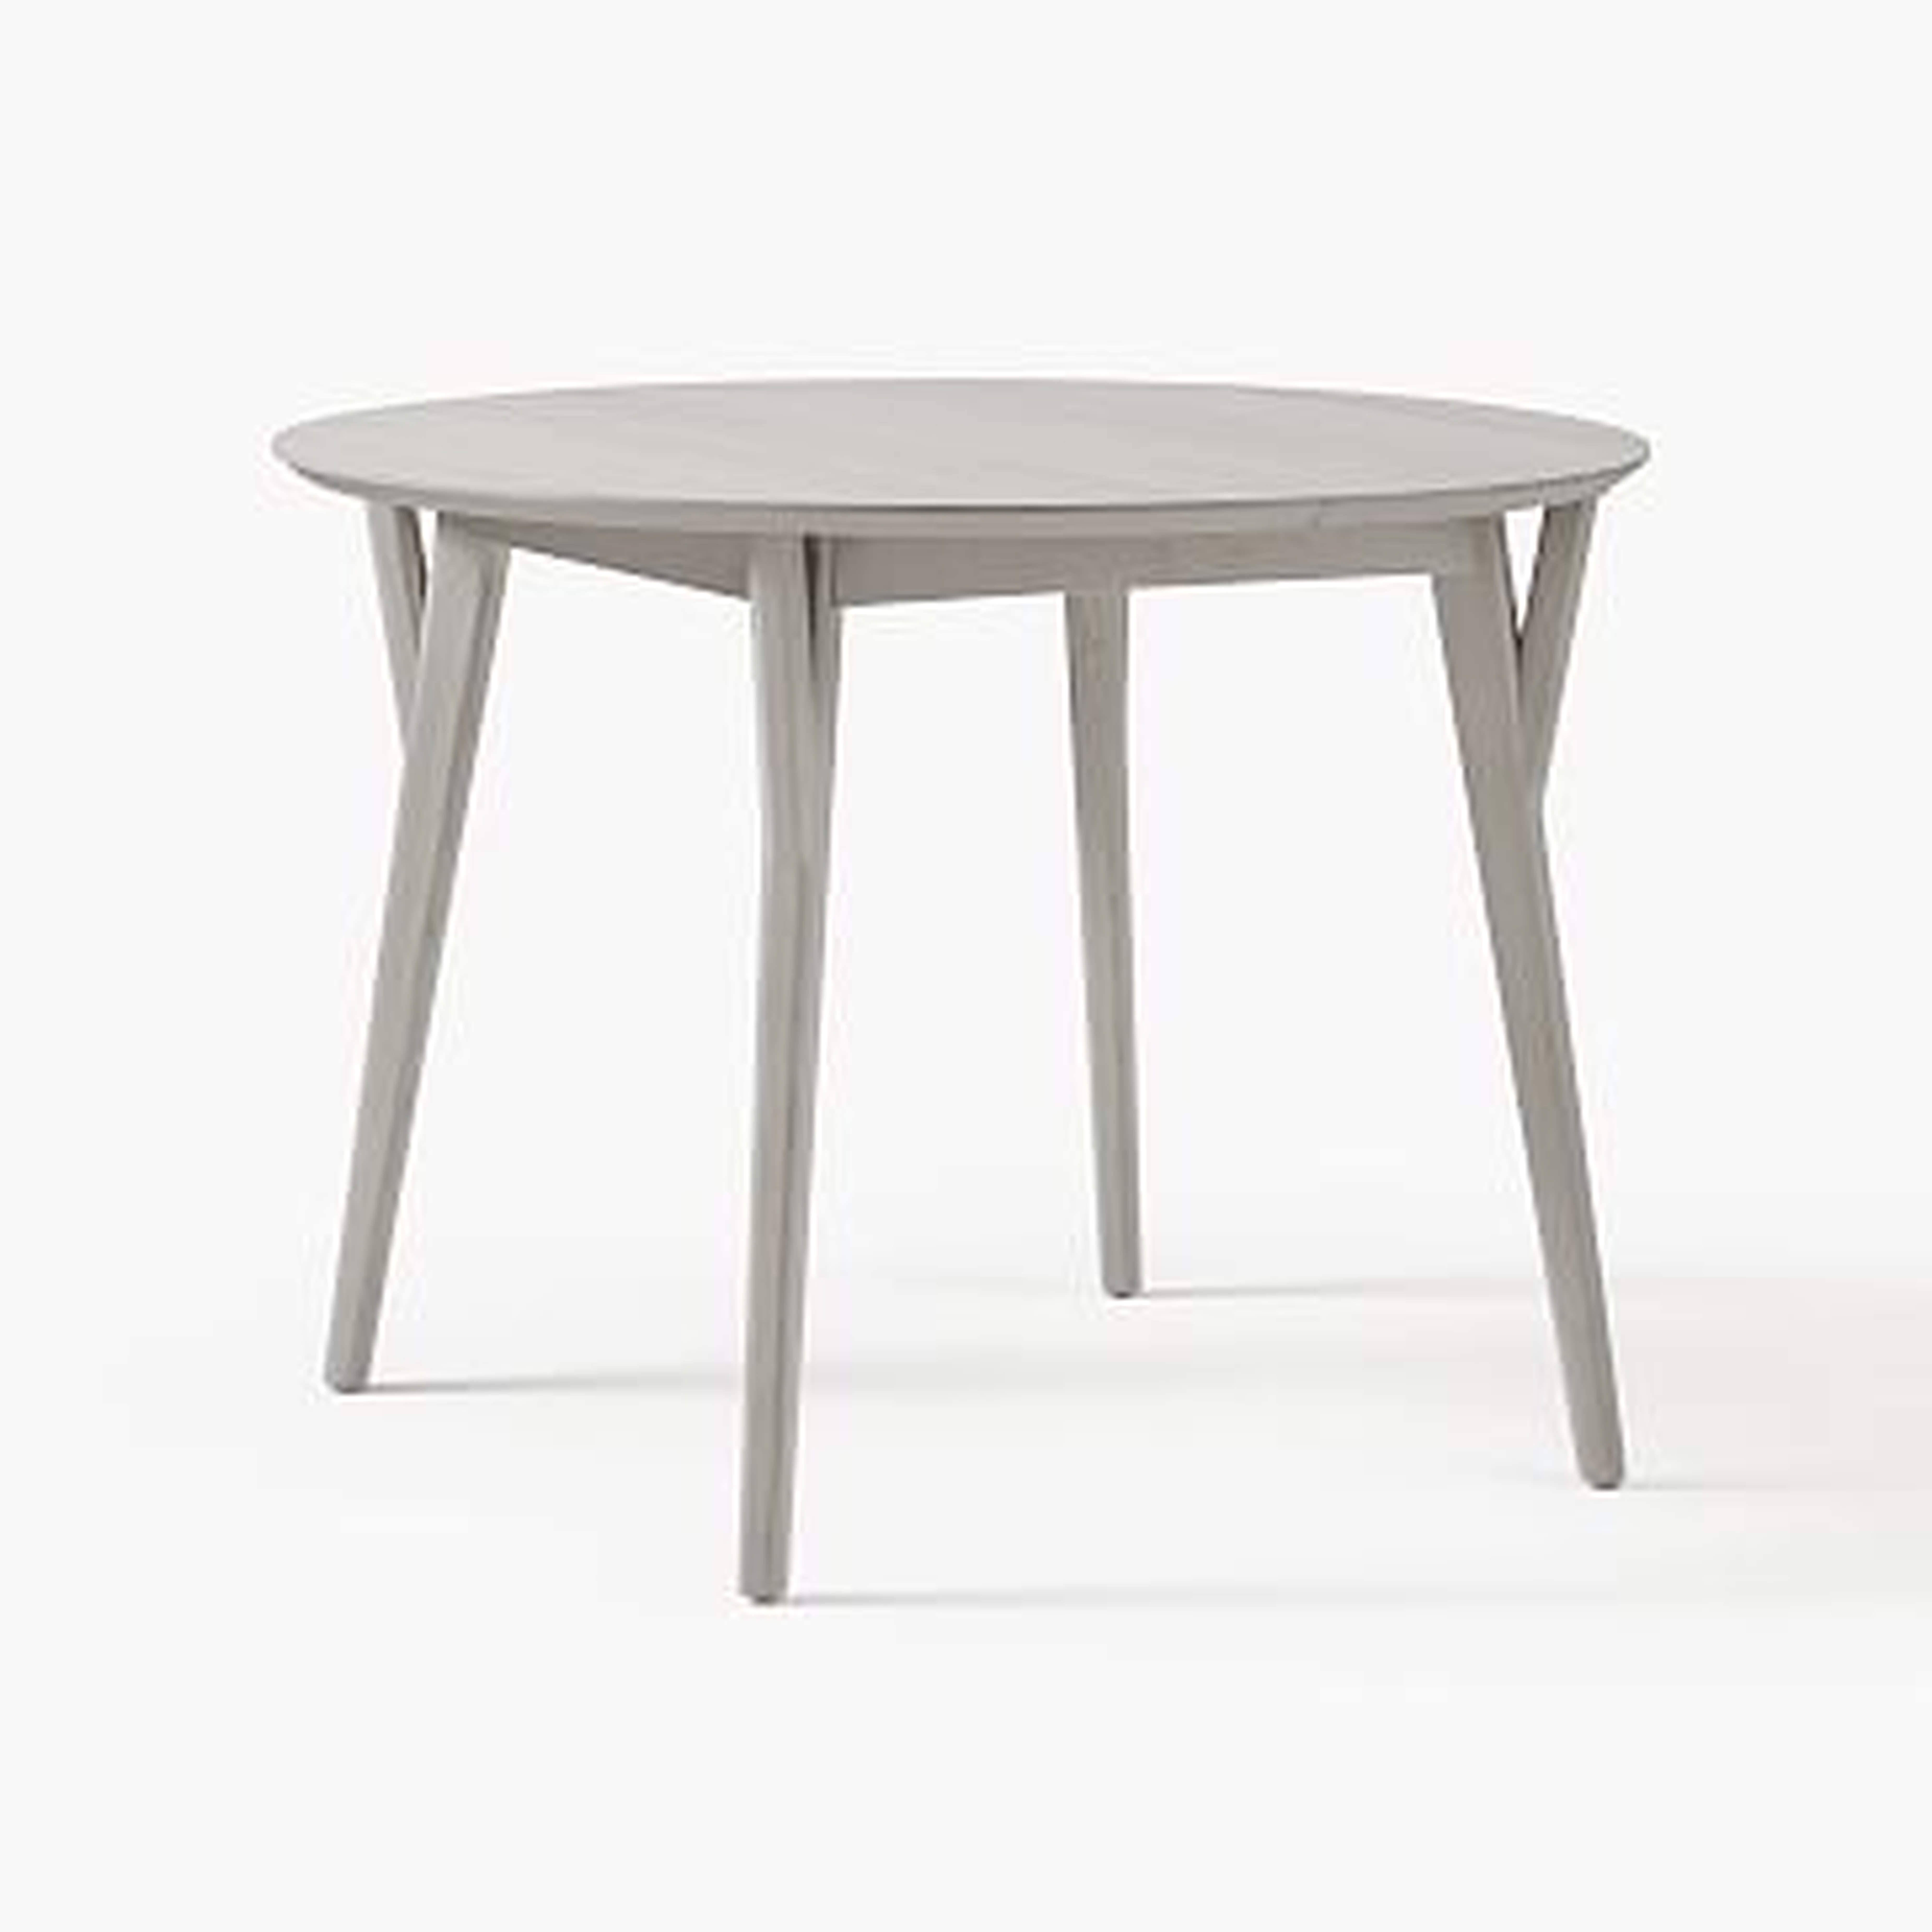 Mid-Century 42" Round Expandable Dining Table, Pebble Gray - West Elm